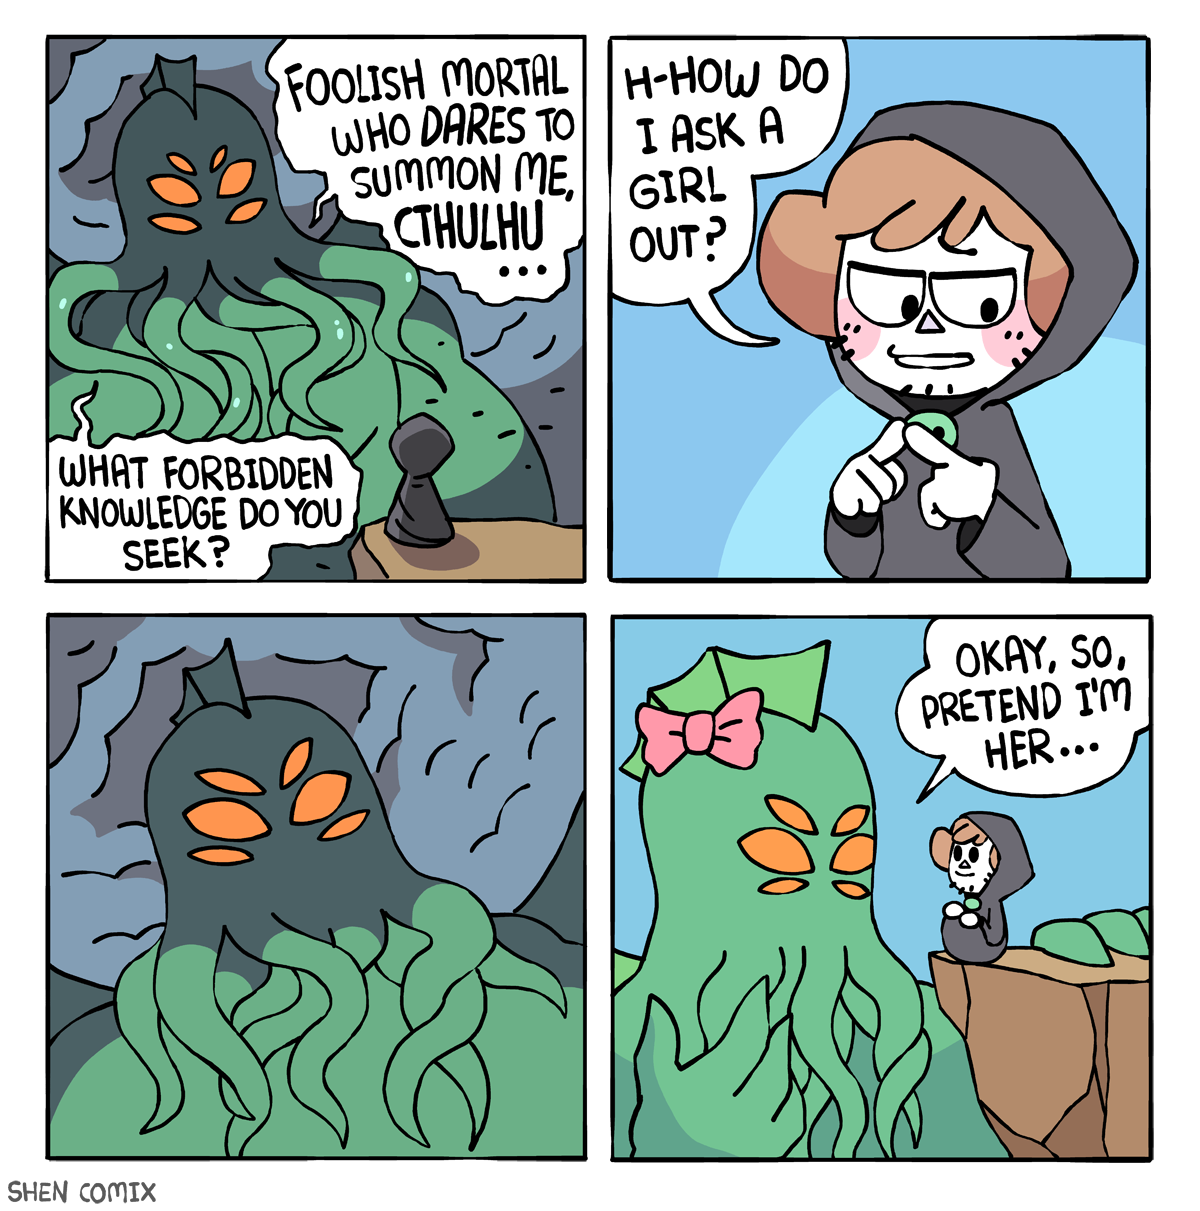 Cthulhu only wants pure love